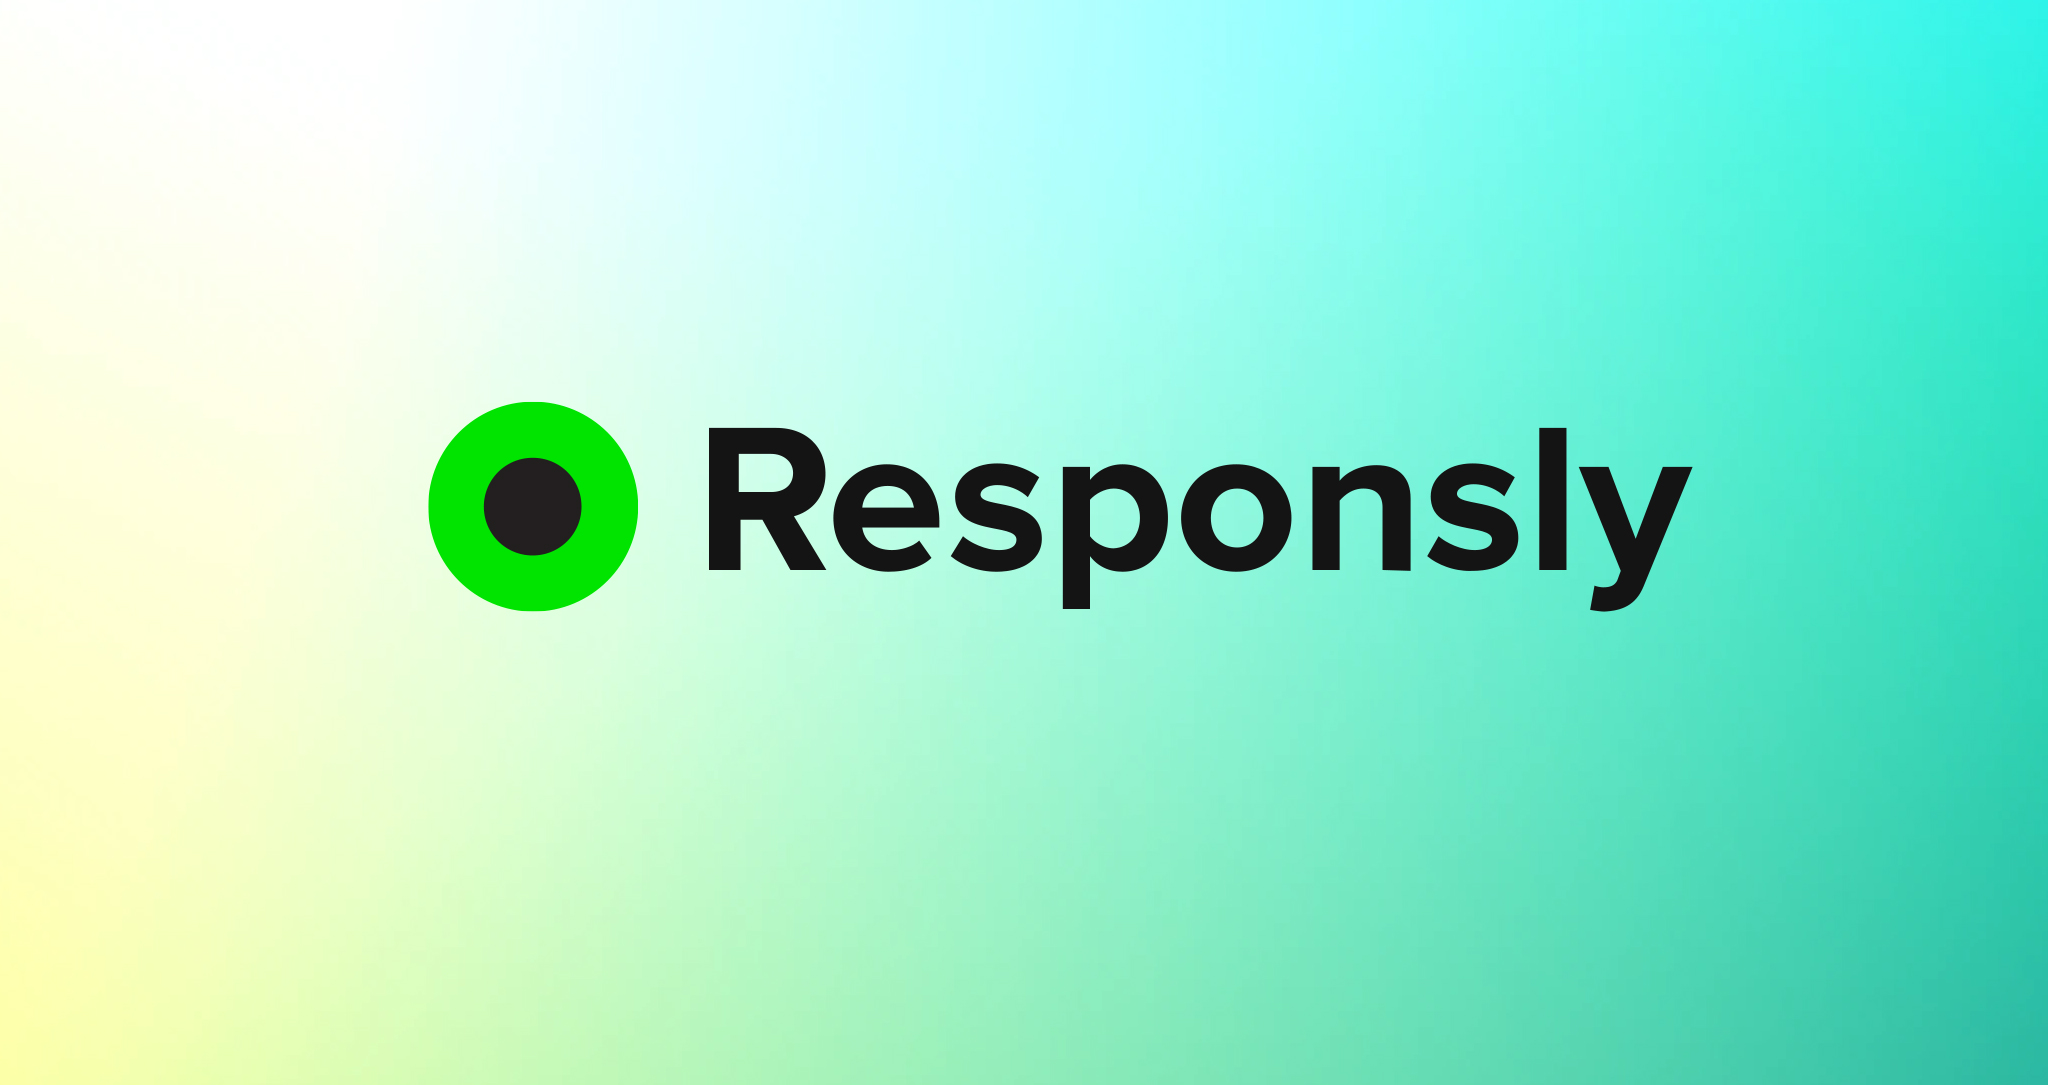 Welcome to Responsly